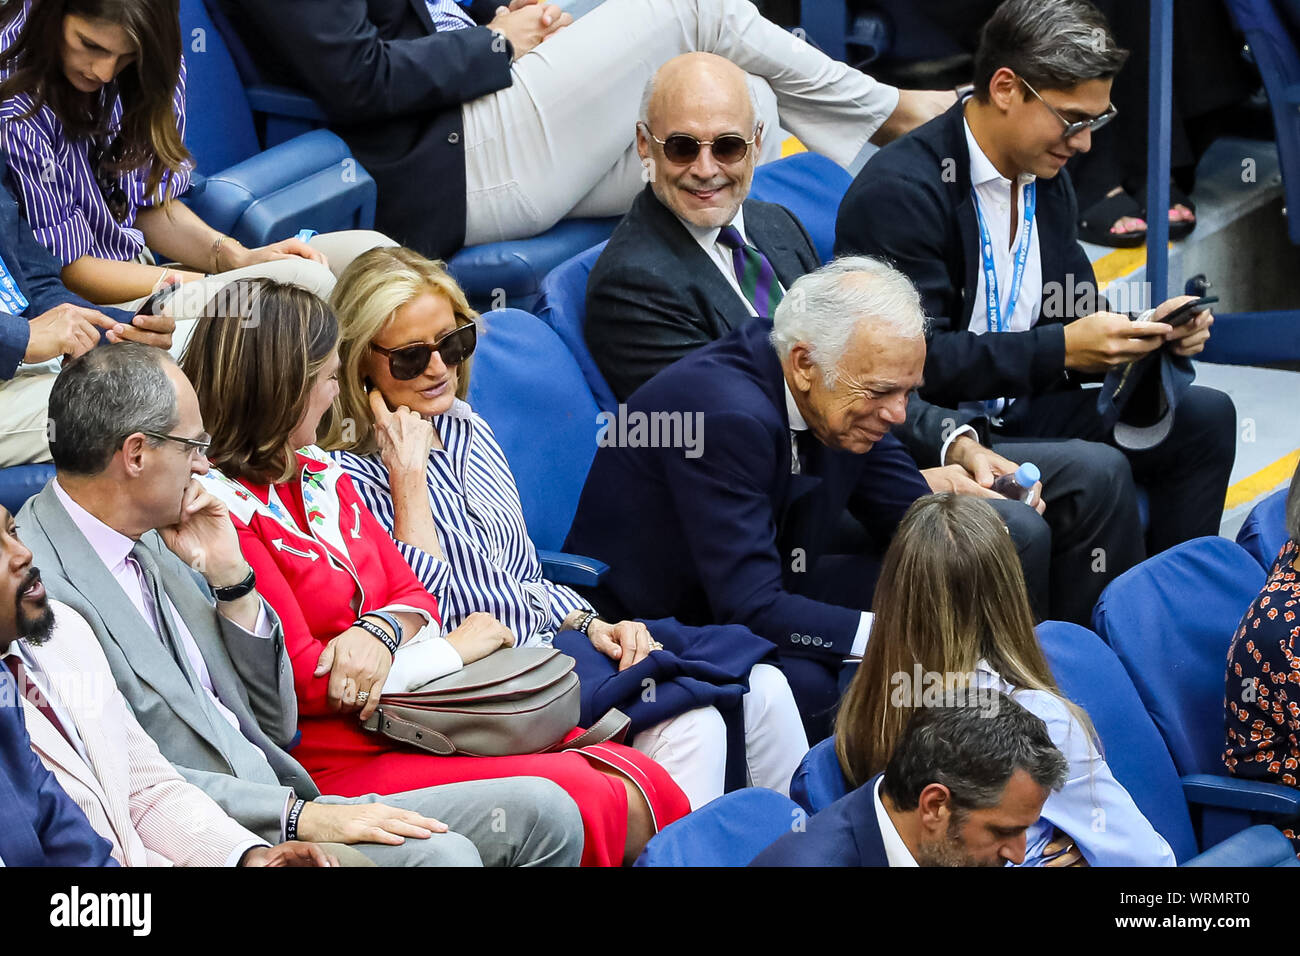 New York Usa 08th Sep 2019 Fashion Designer Ralph Lauren And Wife Ricky Anne Loew Beer Watch Rafael Nadal Of Spain Against Daniil Medvedev Of Russia In The Men S Singles Final At Arthur